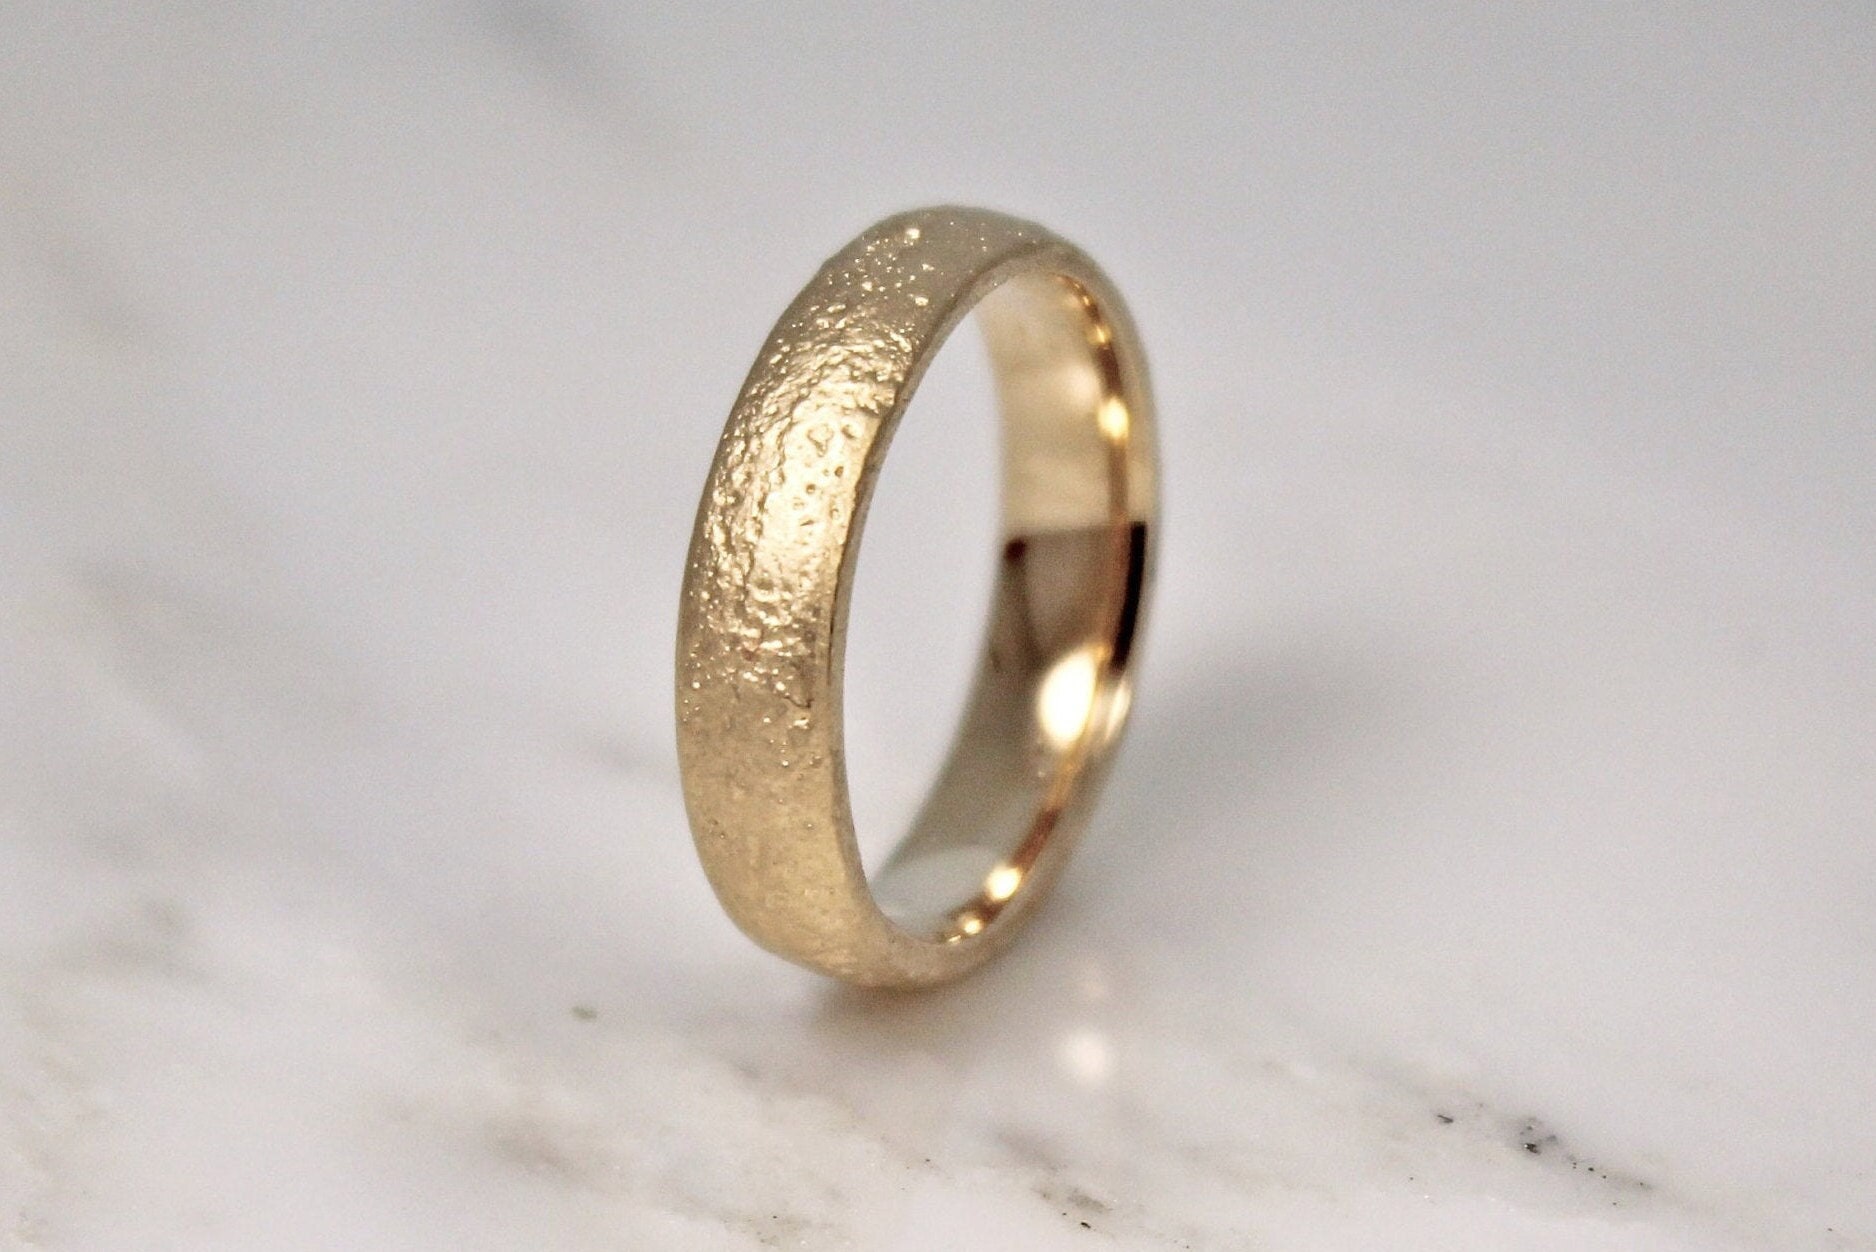 18Ct Yellow Gold Sandcast Wedding Ring, 5mm Textured Band, Rustic Organic Natural Design. Woodengold